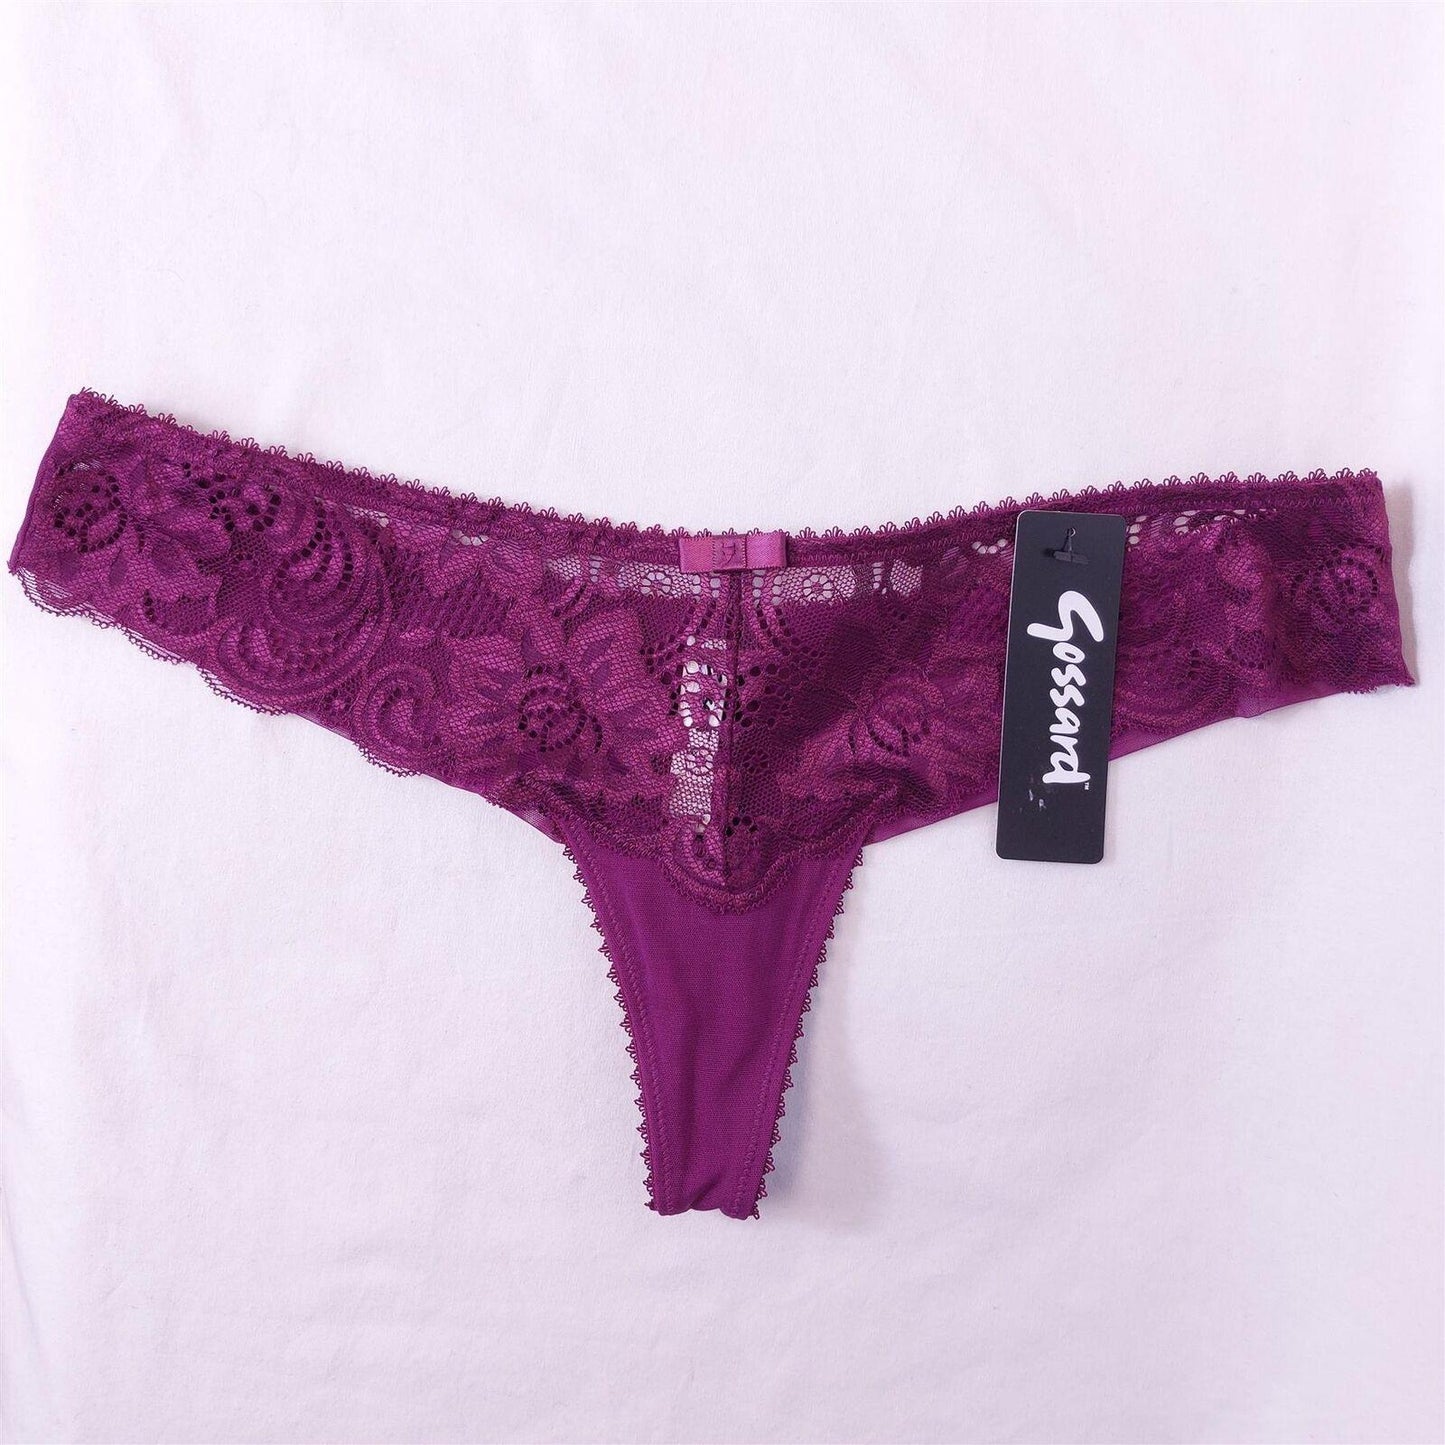 2-Pack Gossard Lace Thong Knickers Multipack Size 8-10 Purple Multipack New